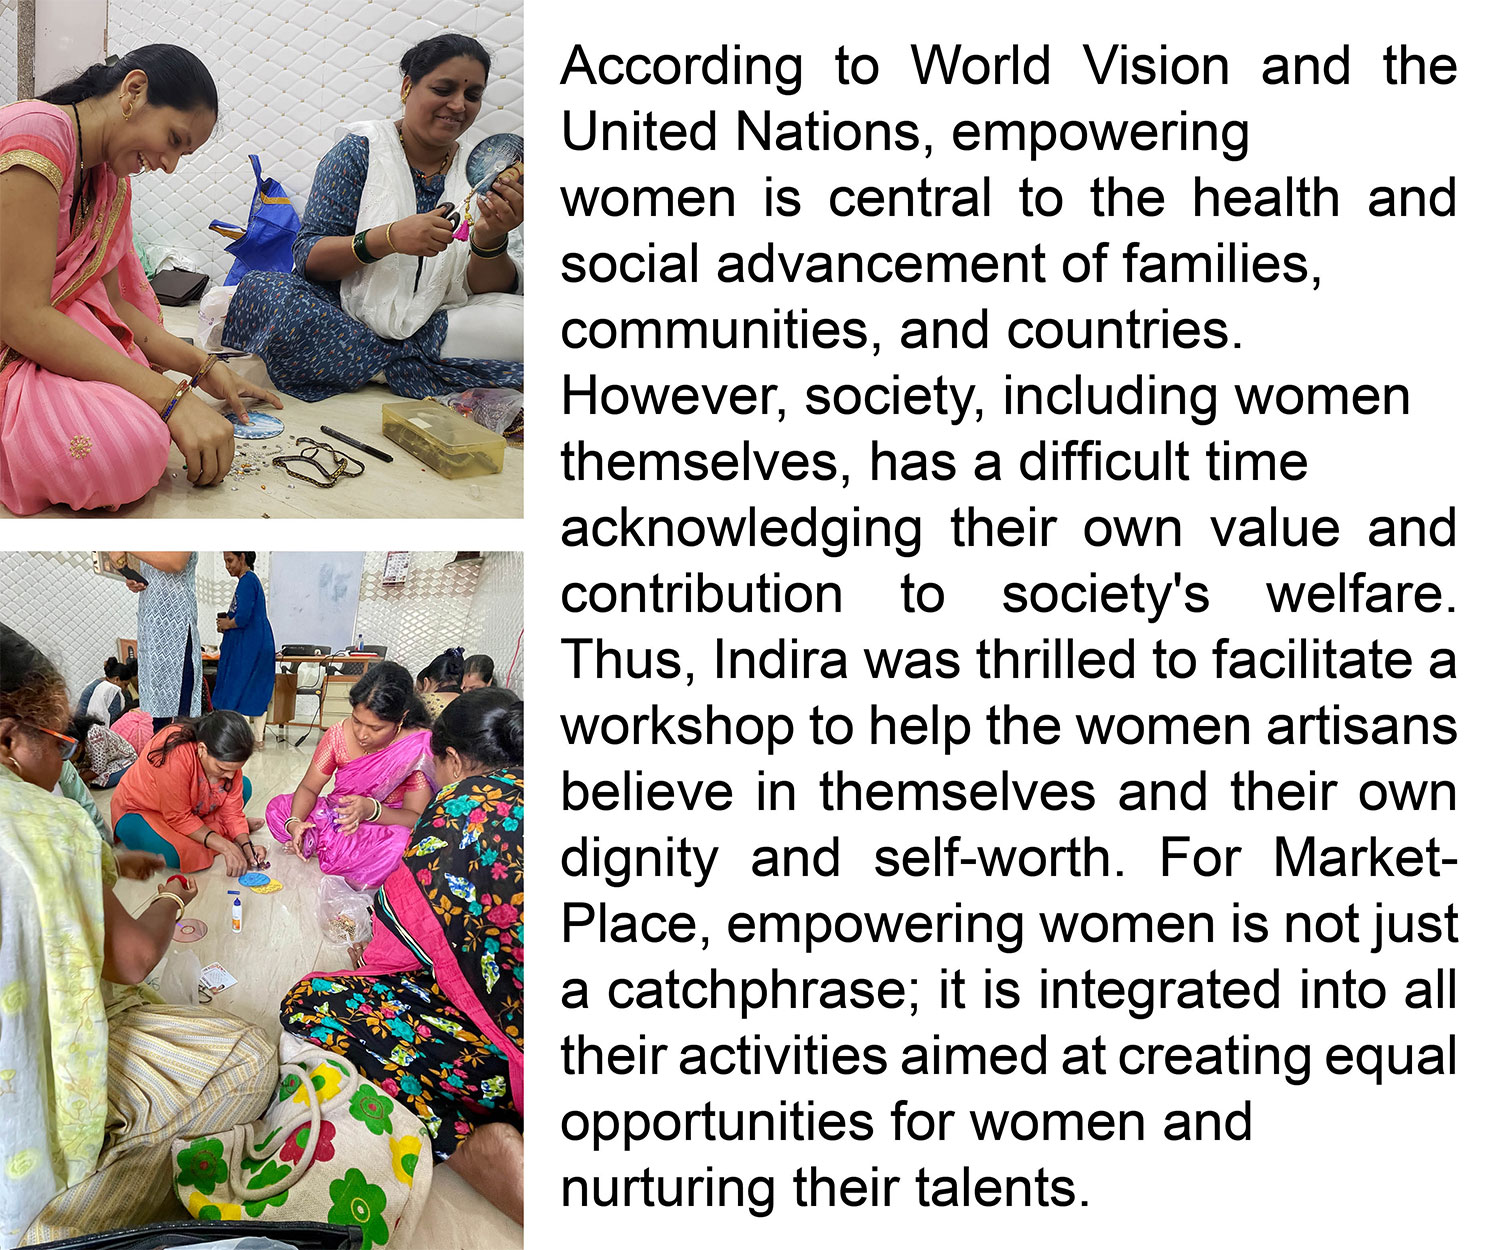 According to World Vision and the United Nations, empowering women is central to the health and social advancement of families, communities, and countries. However, society, including women themselves, have a difficult time acknowledging
their own value and contribution to society's welfare. Thus, Indira was thrilled to facilitate a workshop to help the women artisans believe in themselves and their own dignity and self-worth. For MarketPlace, empowering women is not just a catchphrase; it is integrated into all their activities aimed at creating equal opportunities for women and nurturing their talents.